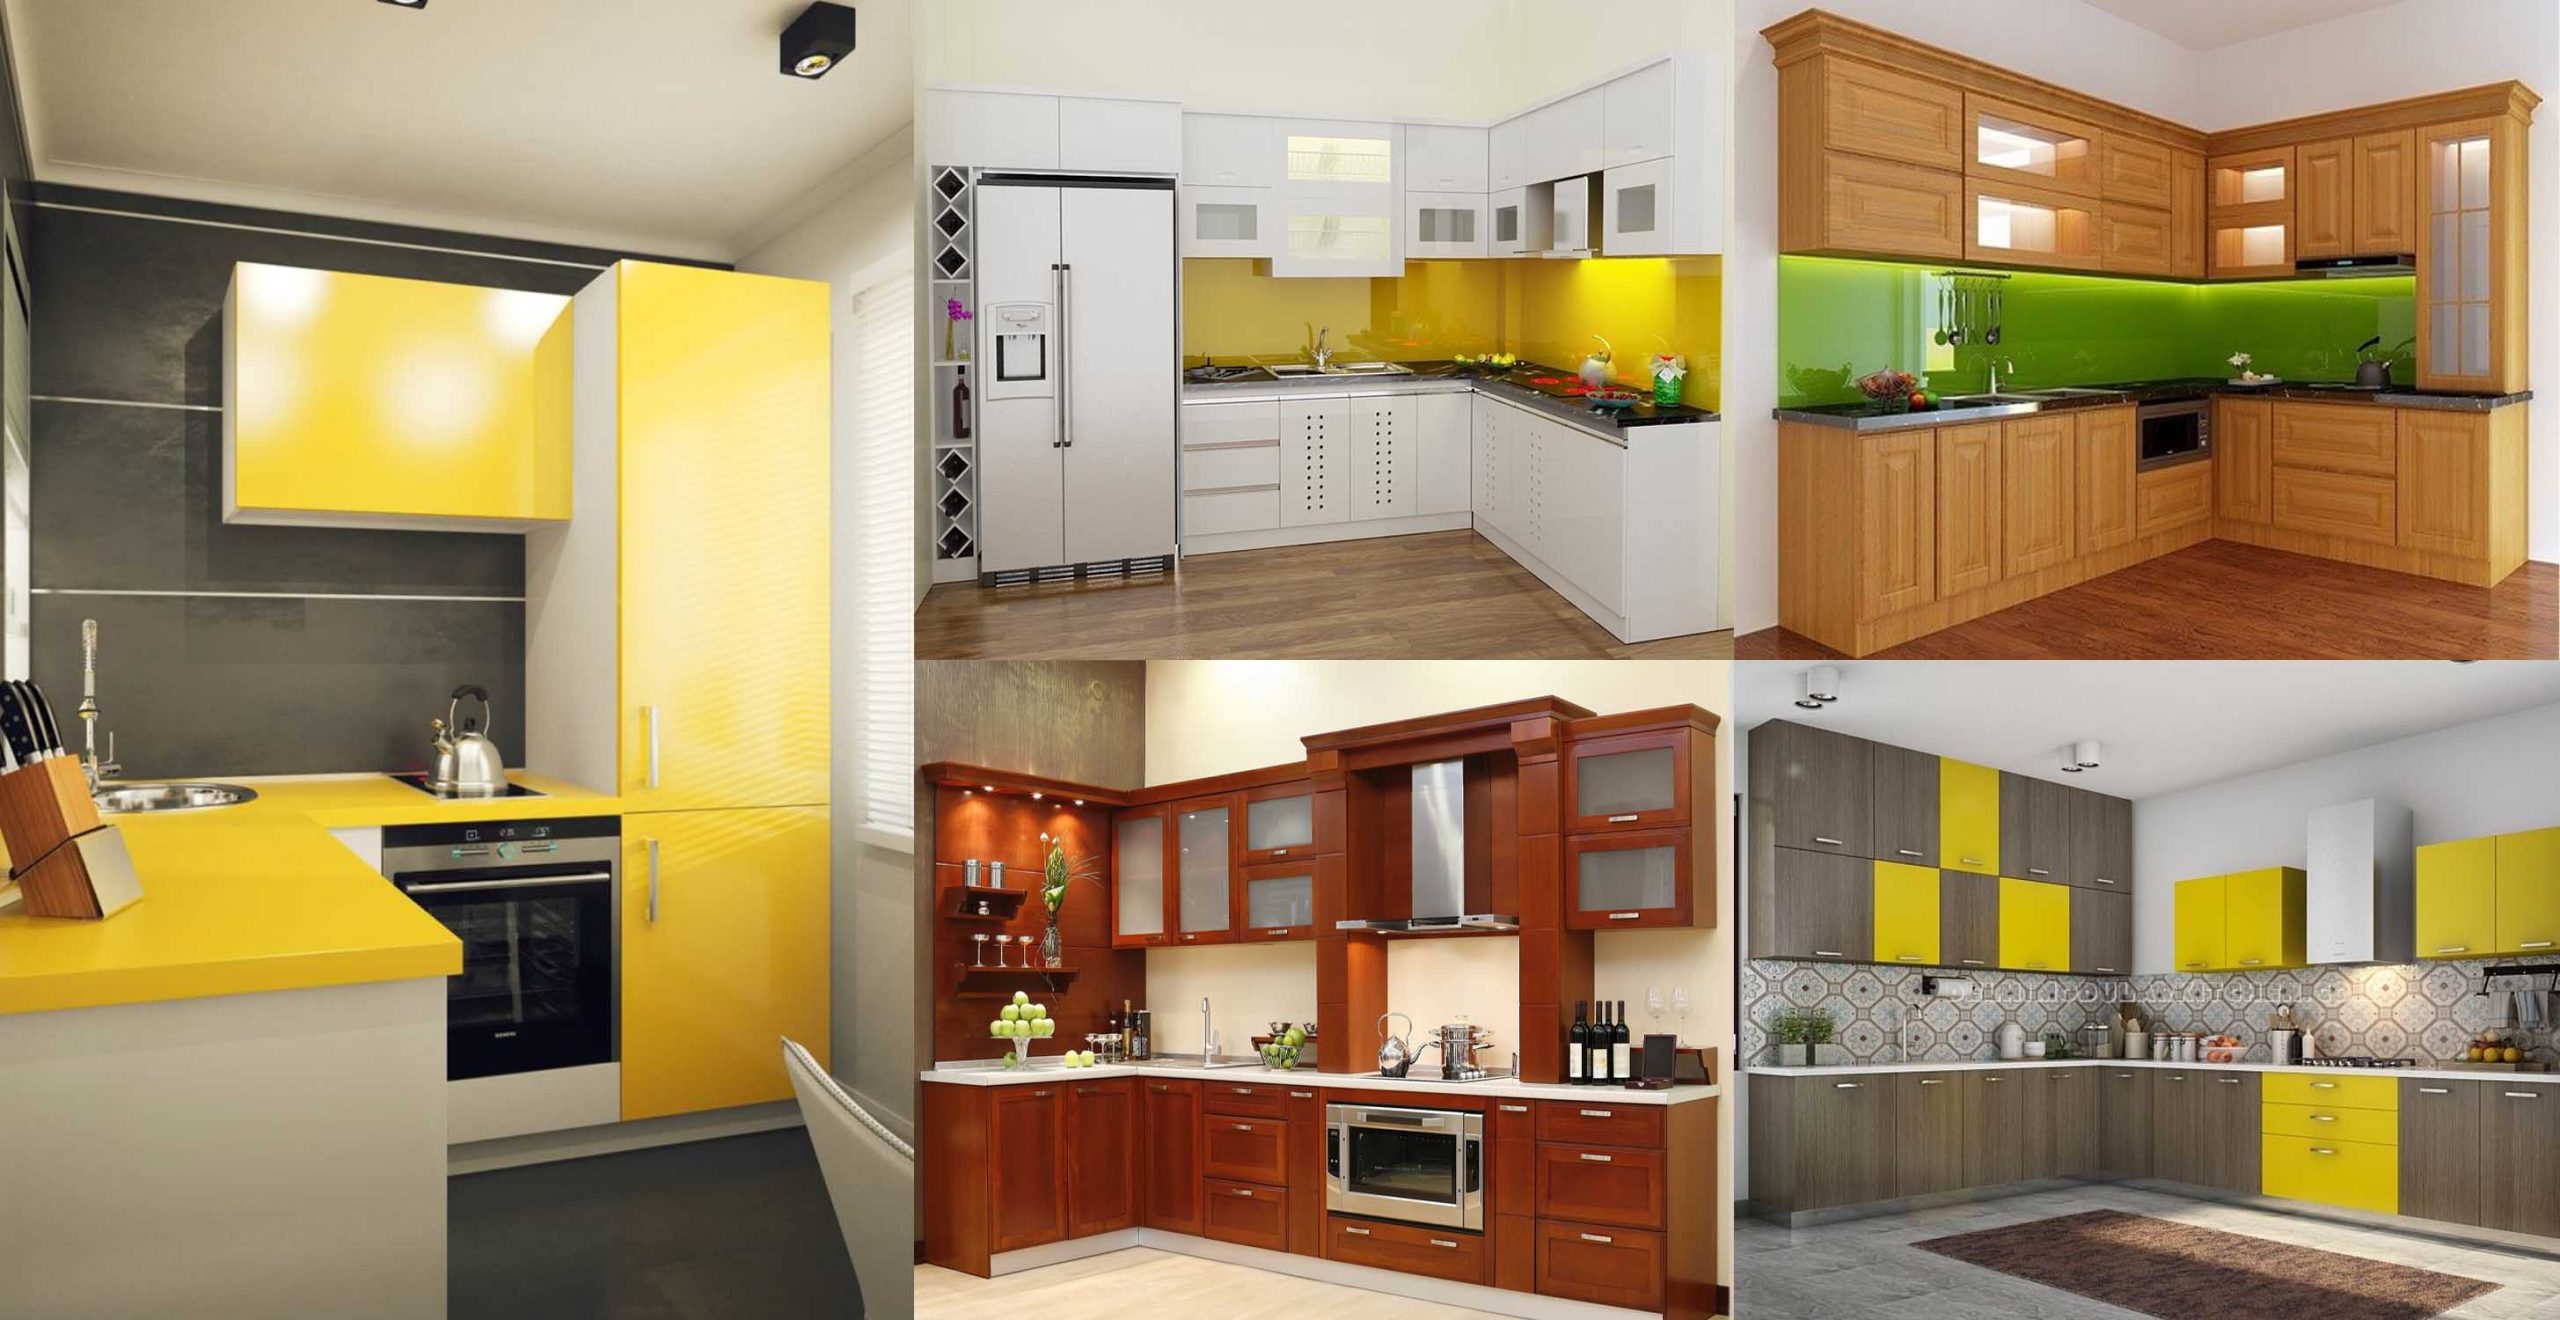 Amazing Kitchen Design Concepts - Engineering Discoveries